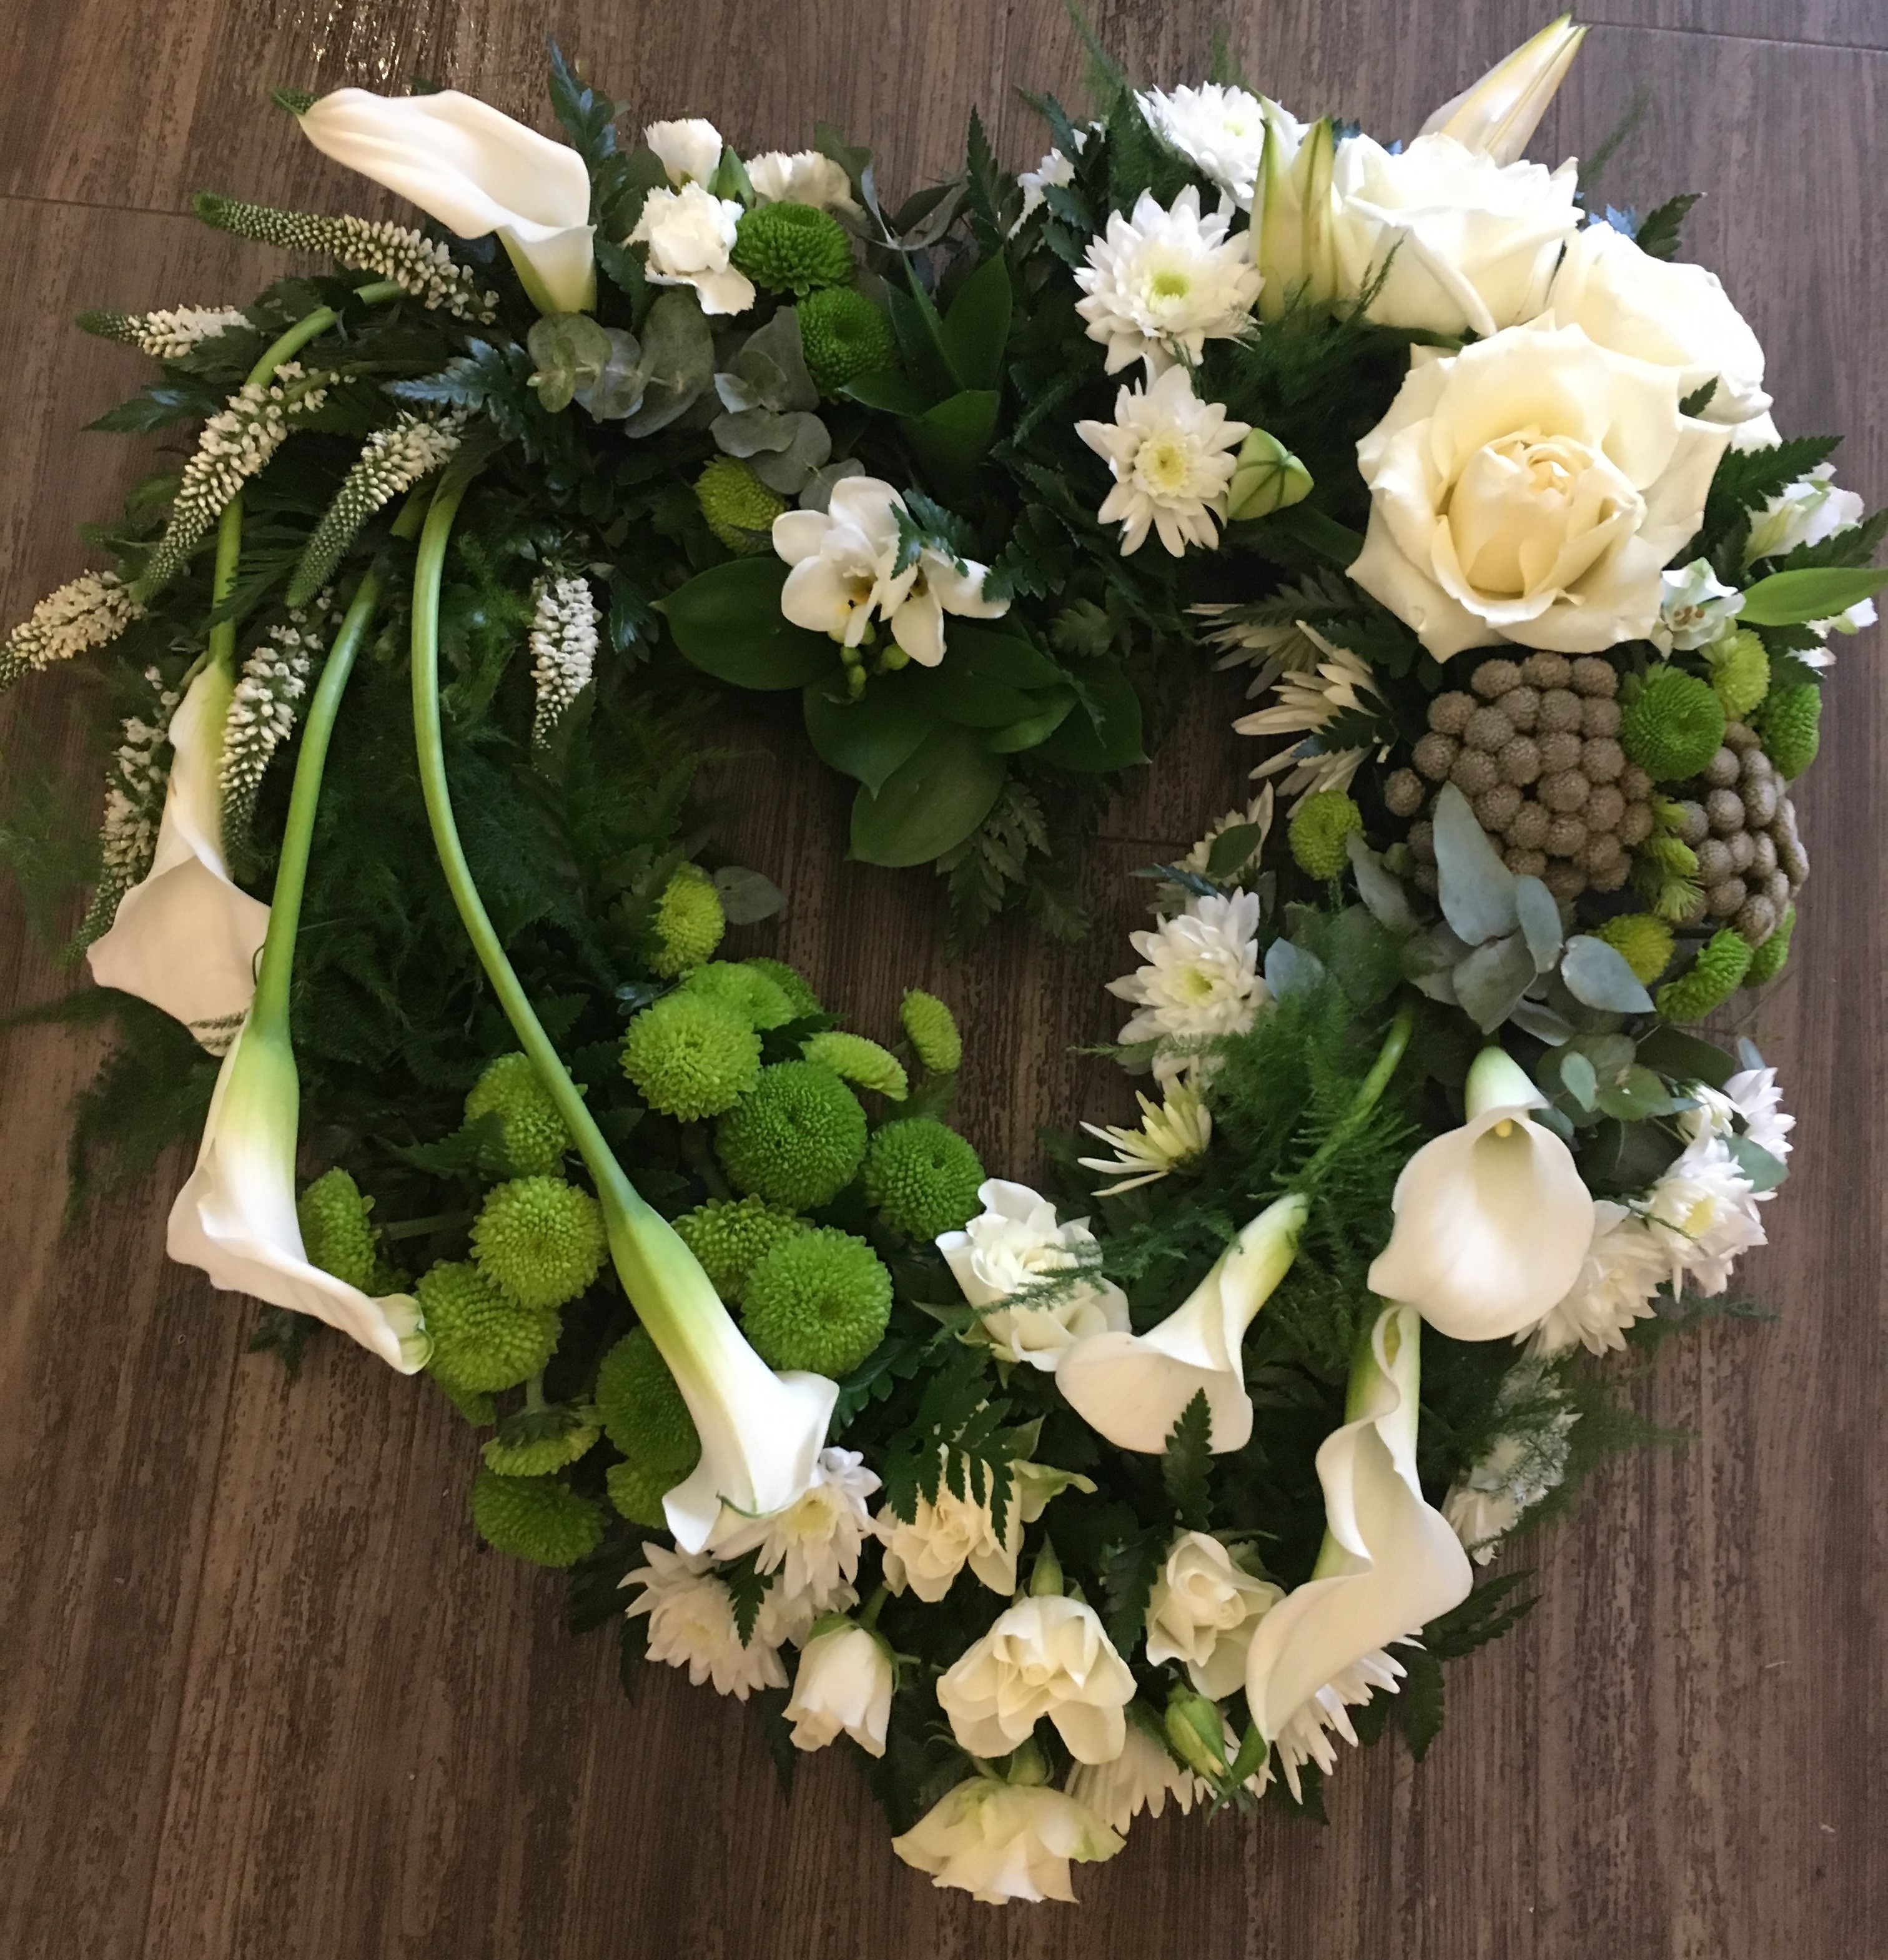 bespoke fresh flowers in a woodland rustic style heart clusters of fresh flowers tribute